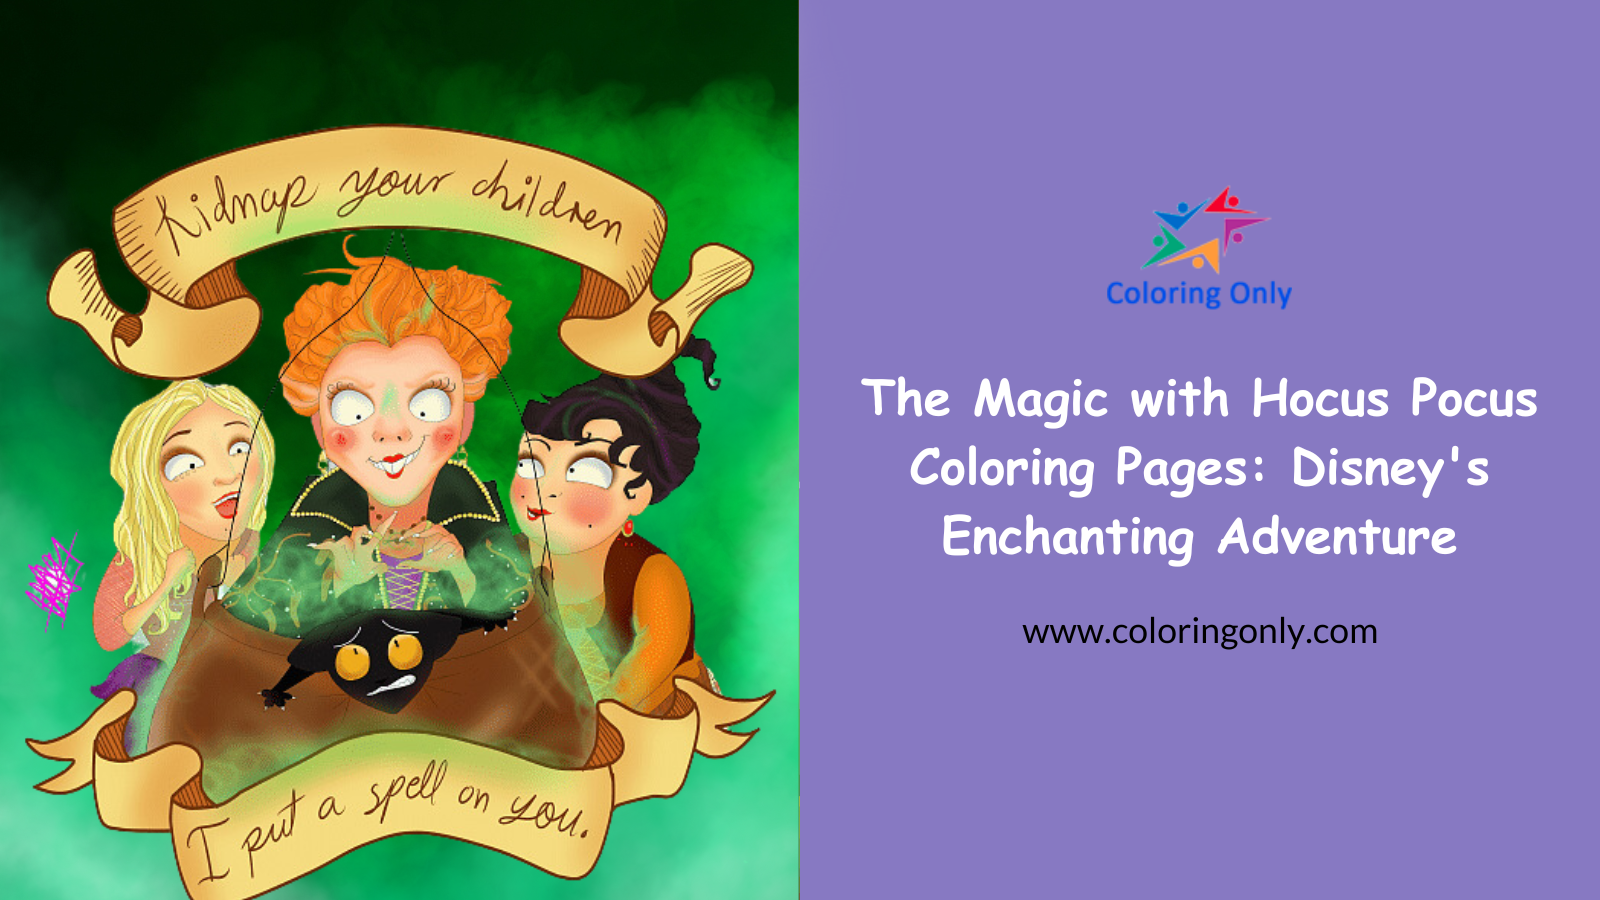 The Magic with Hocus Pocus Coloring Pages: Disney's Enchanting Adventure